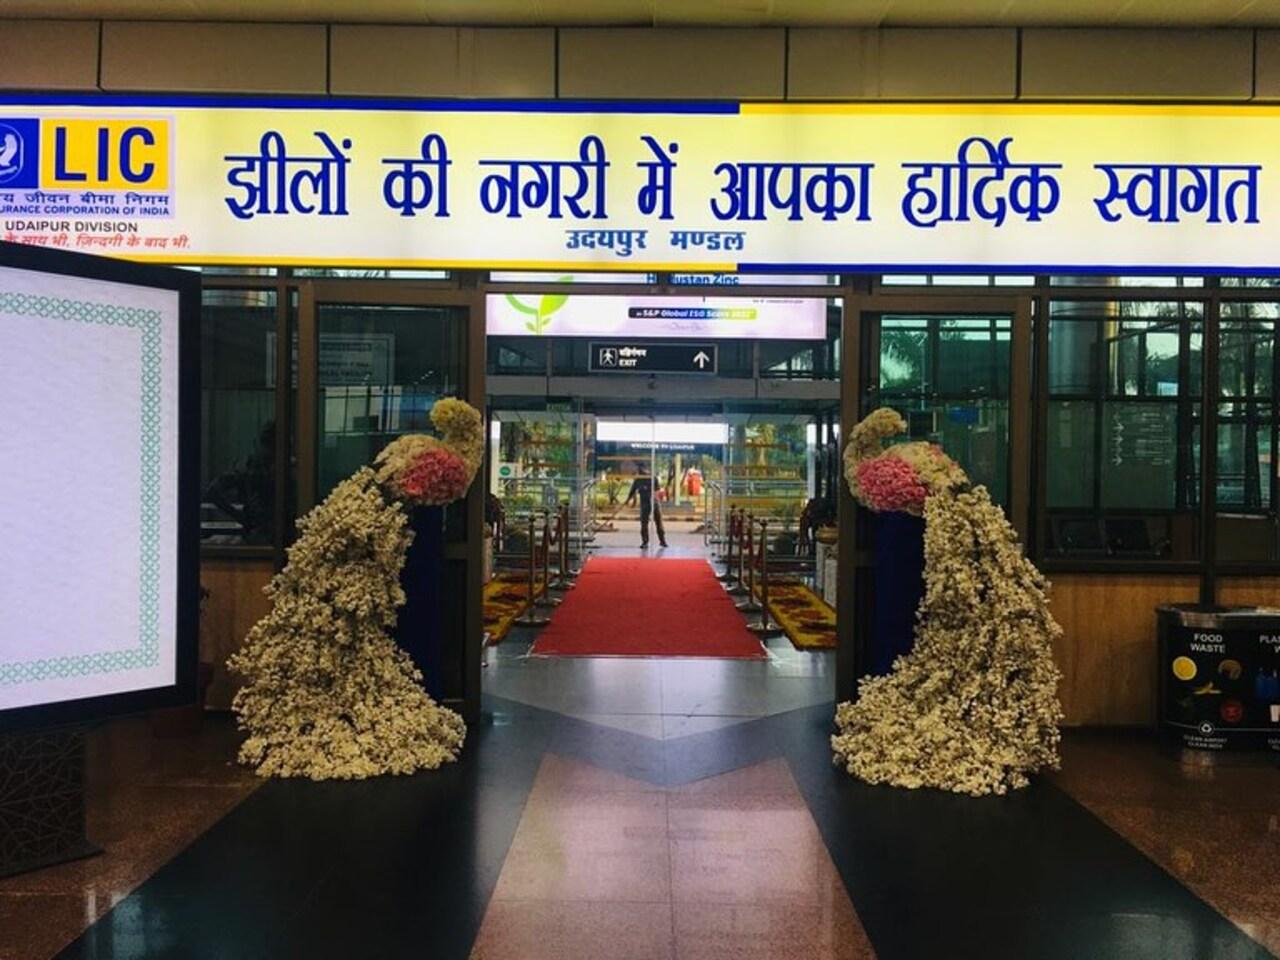 The exit of the airport has also been adorned with flowers and other decorative elements. A red carpet has also been set up near the exit. An elaborate peacock shaped flower decoration welcomed the couple into the city